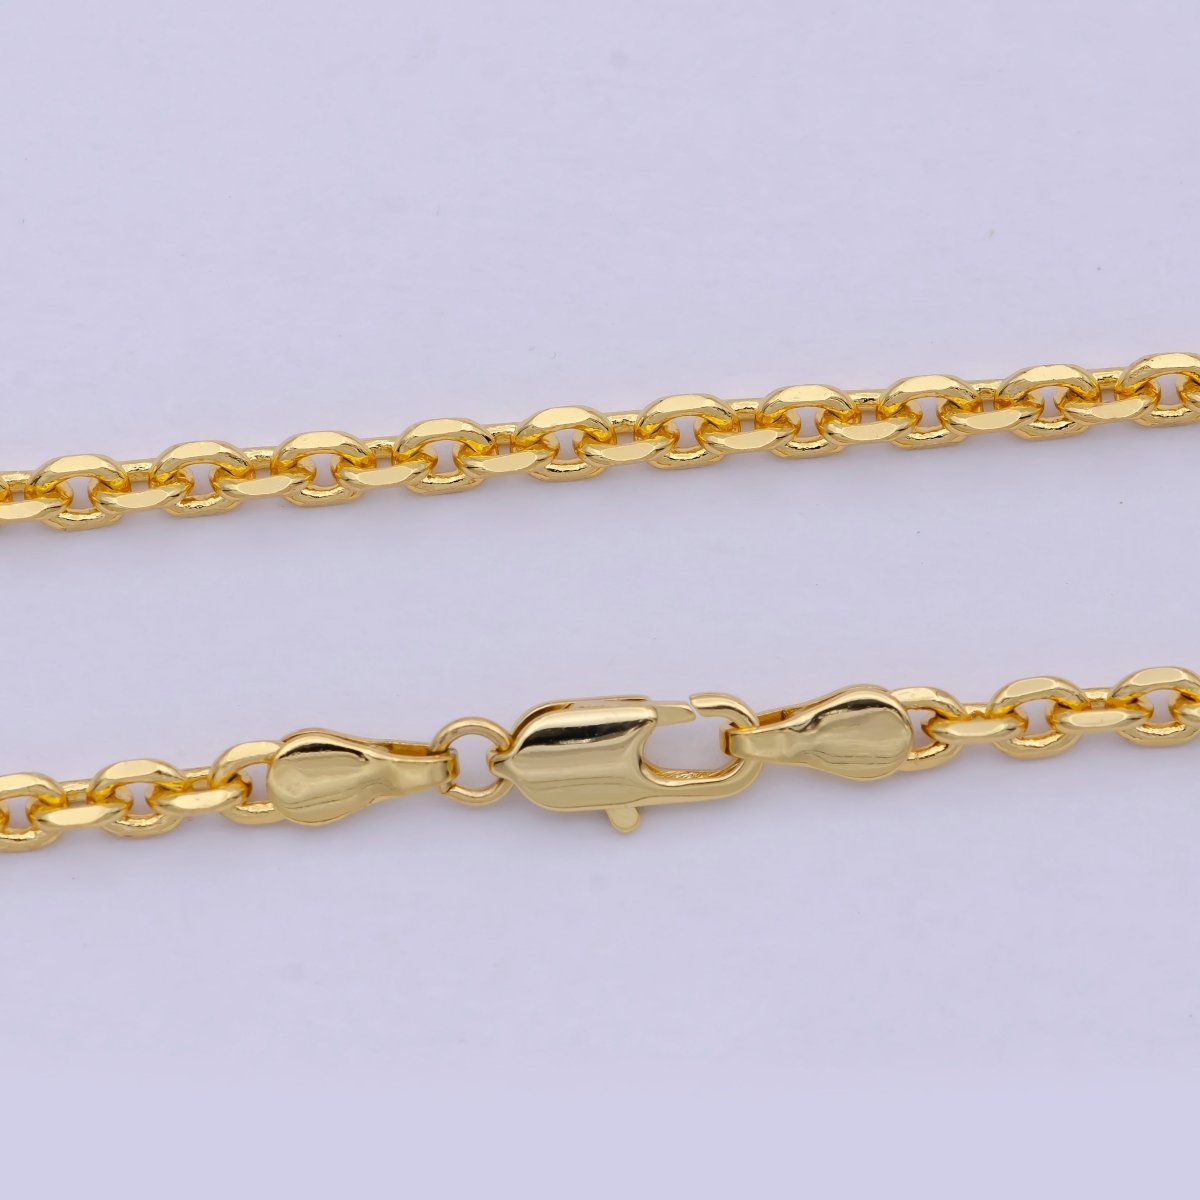 Cable Chain necklace, 24k gold filled chain Dainty gold filled chain, minimalist necklace 17.7 inch chain | WA-809 Clearance Pricing - DLUXCA